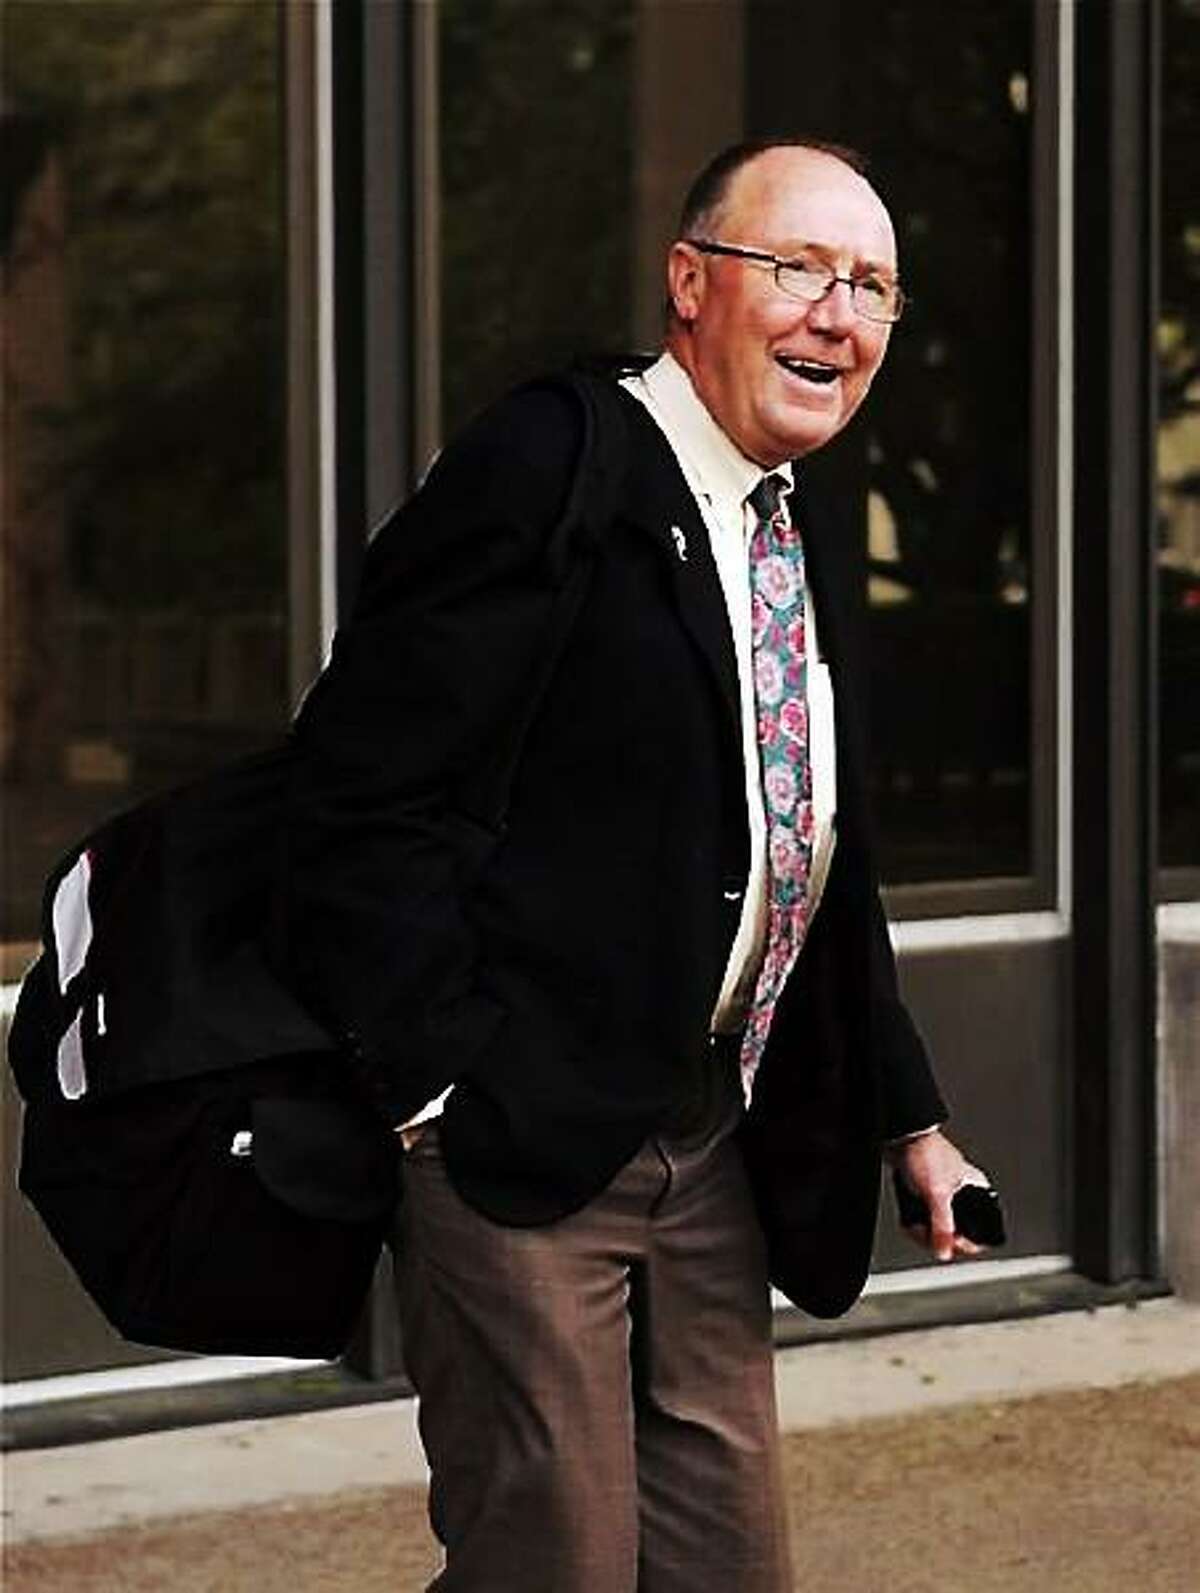 Quinnipiac University athletic director Jack McDonald leaves U.S. District Court in Bridgeport, Conn., Monday, May 11, 2009. McDonald was testifying in a lawsuit brought against the university for proposing to eliminate the women's volleyball team. (AP Photo/Bob Child)